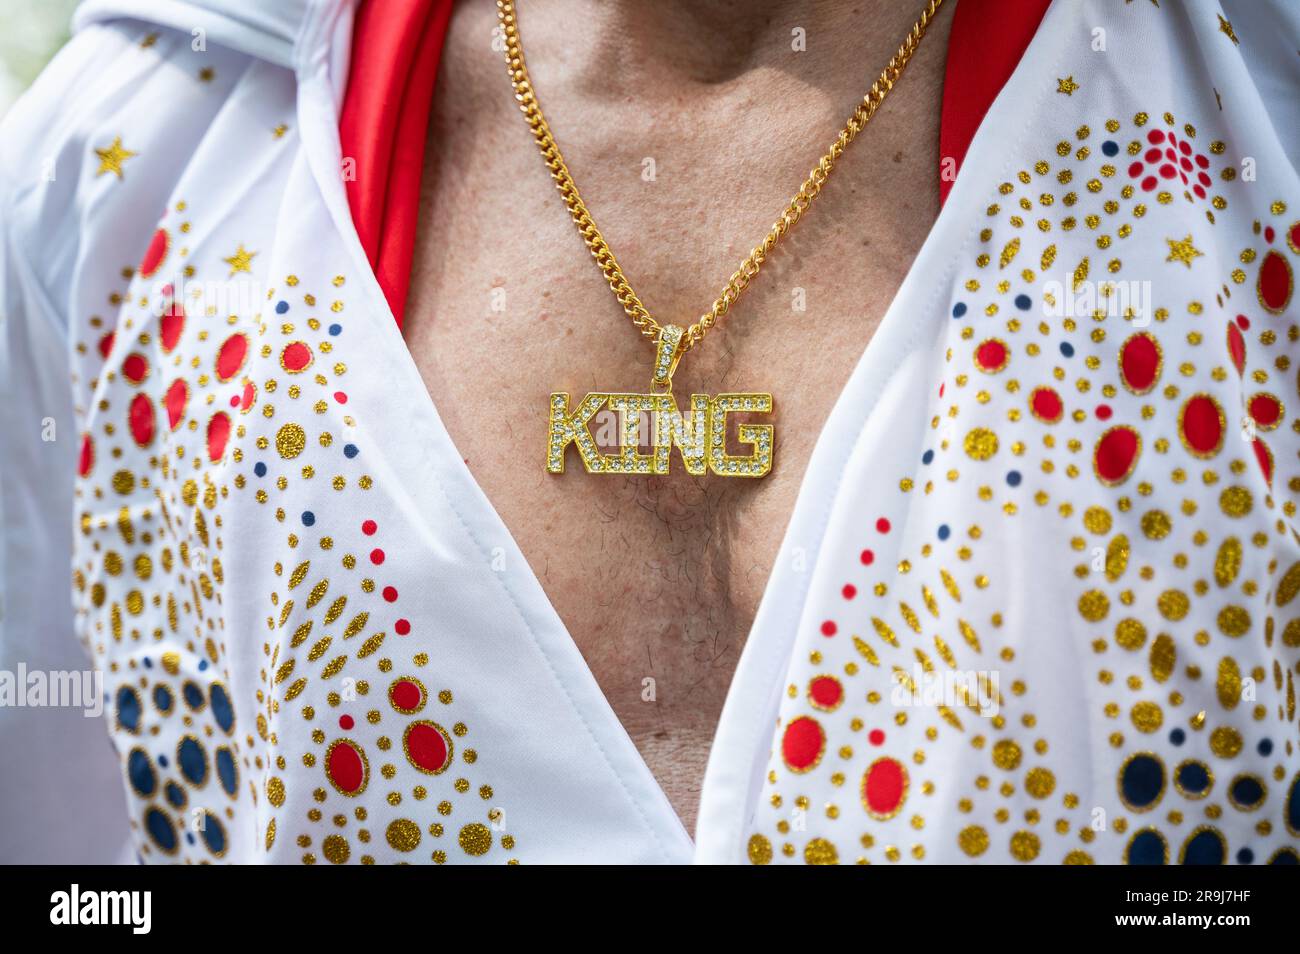 28.05.2023, Berlin, Germany, Europe - Close-up of the necklace with 'King" pendant of an Elvis impersonator at the Carnival of Cultures in Kreuzberg. Stock Photo